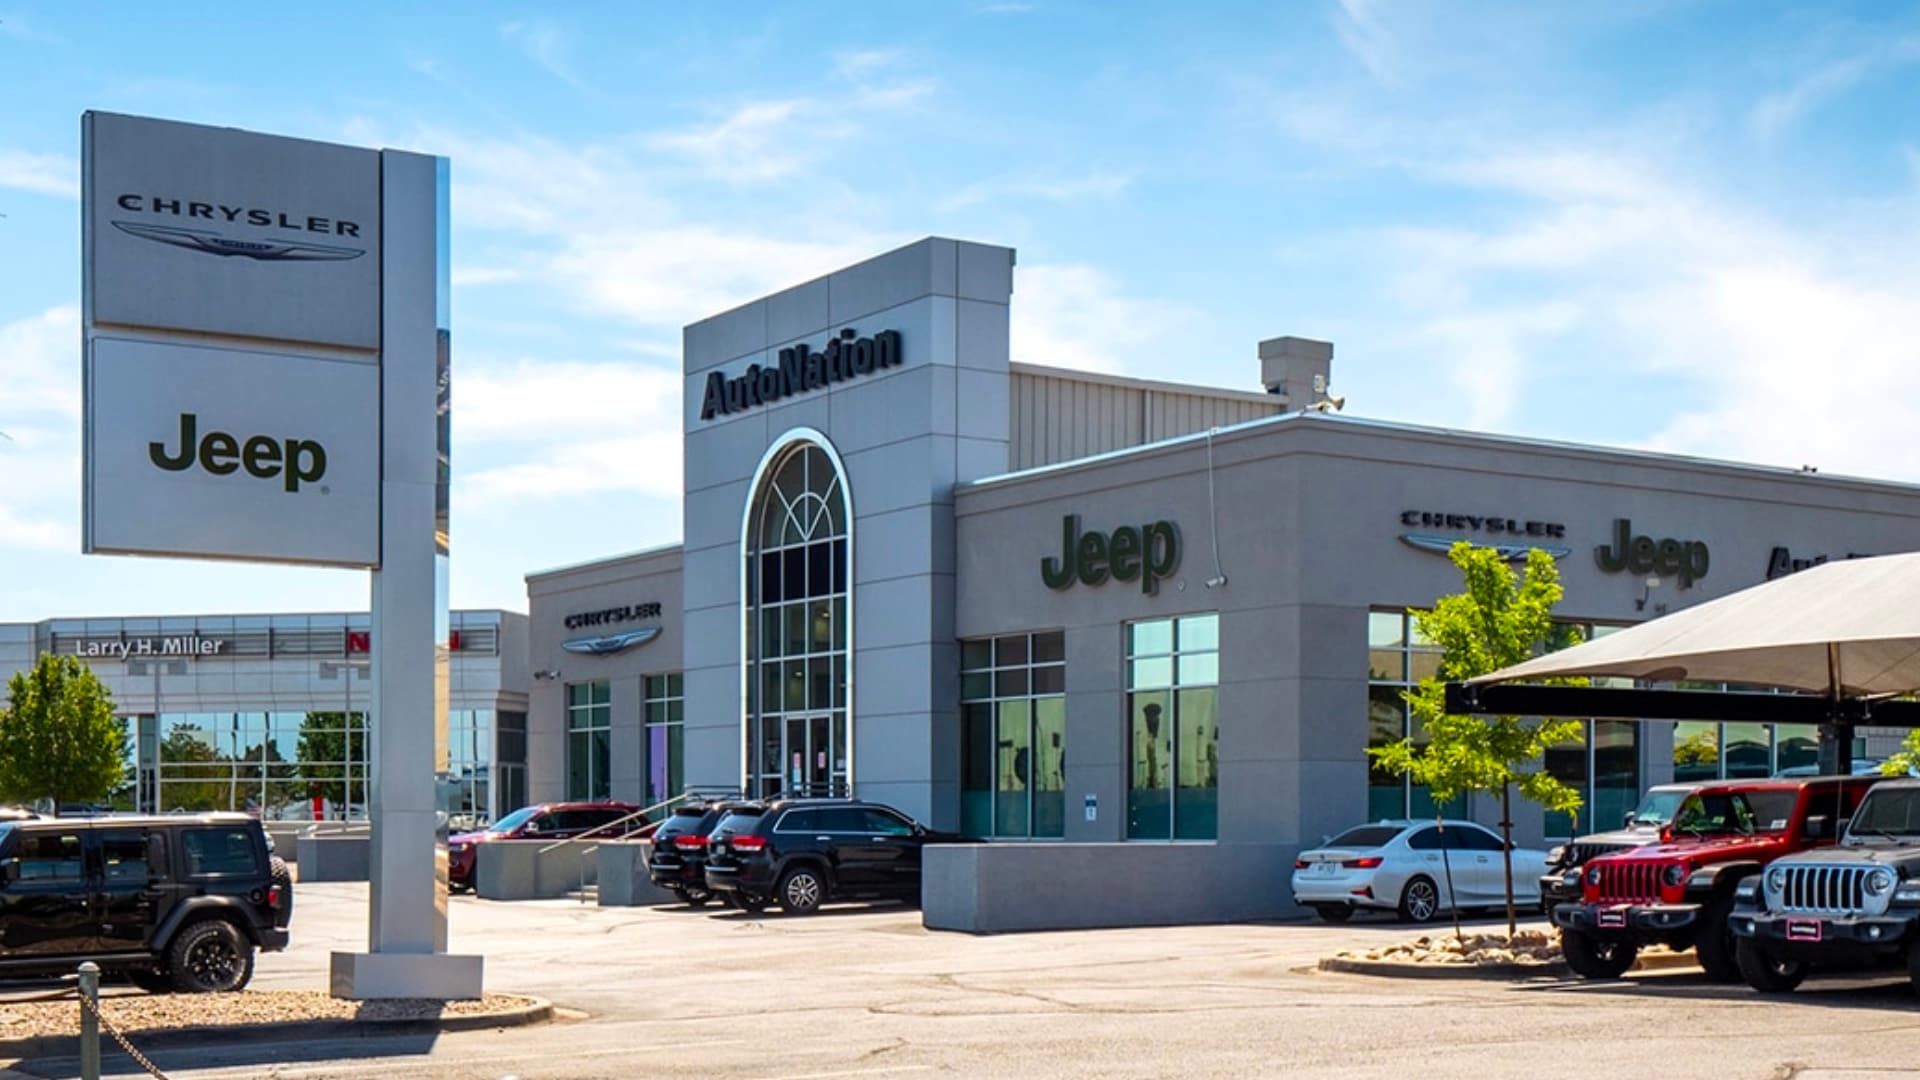 Exterior view of Autonation Chrysler Jeep Arapahoe during a clear sunny day. Many vehicles parked near the grey building. Trees and greenery are visible around the parking lot and surrounding area.